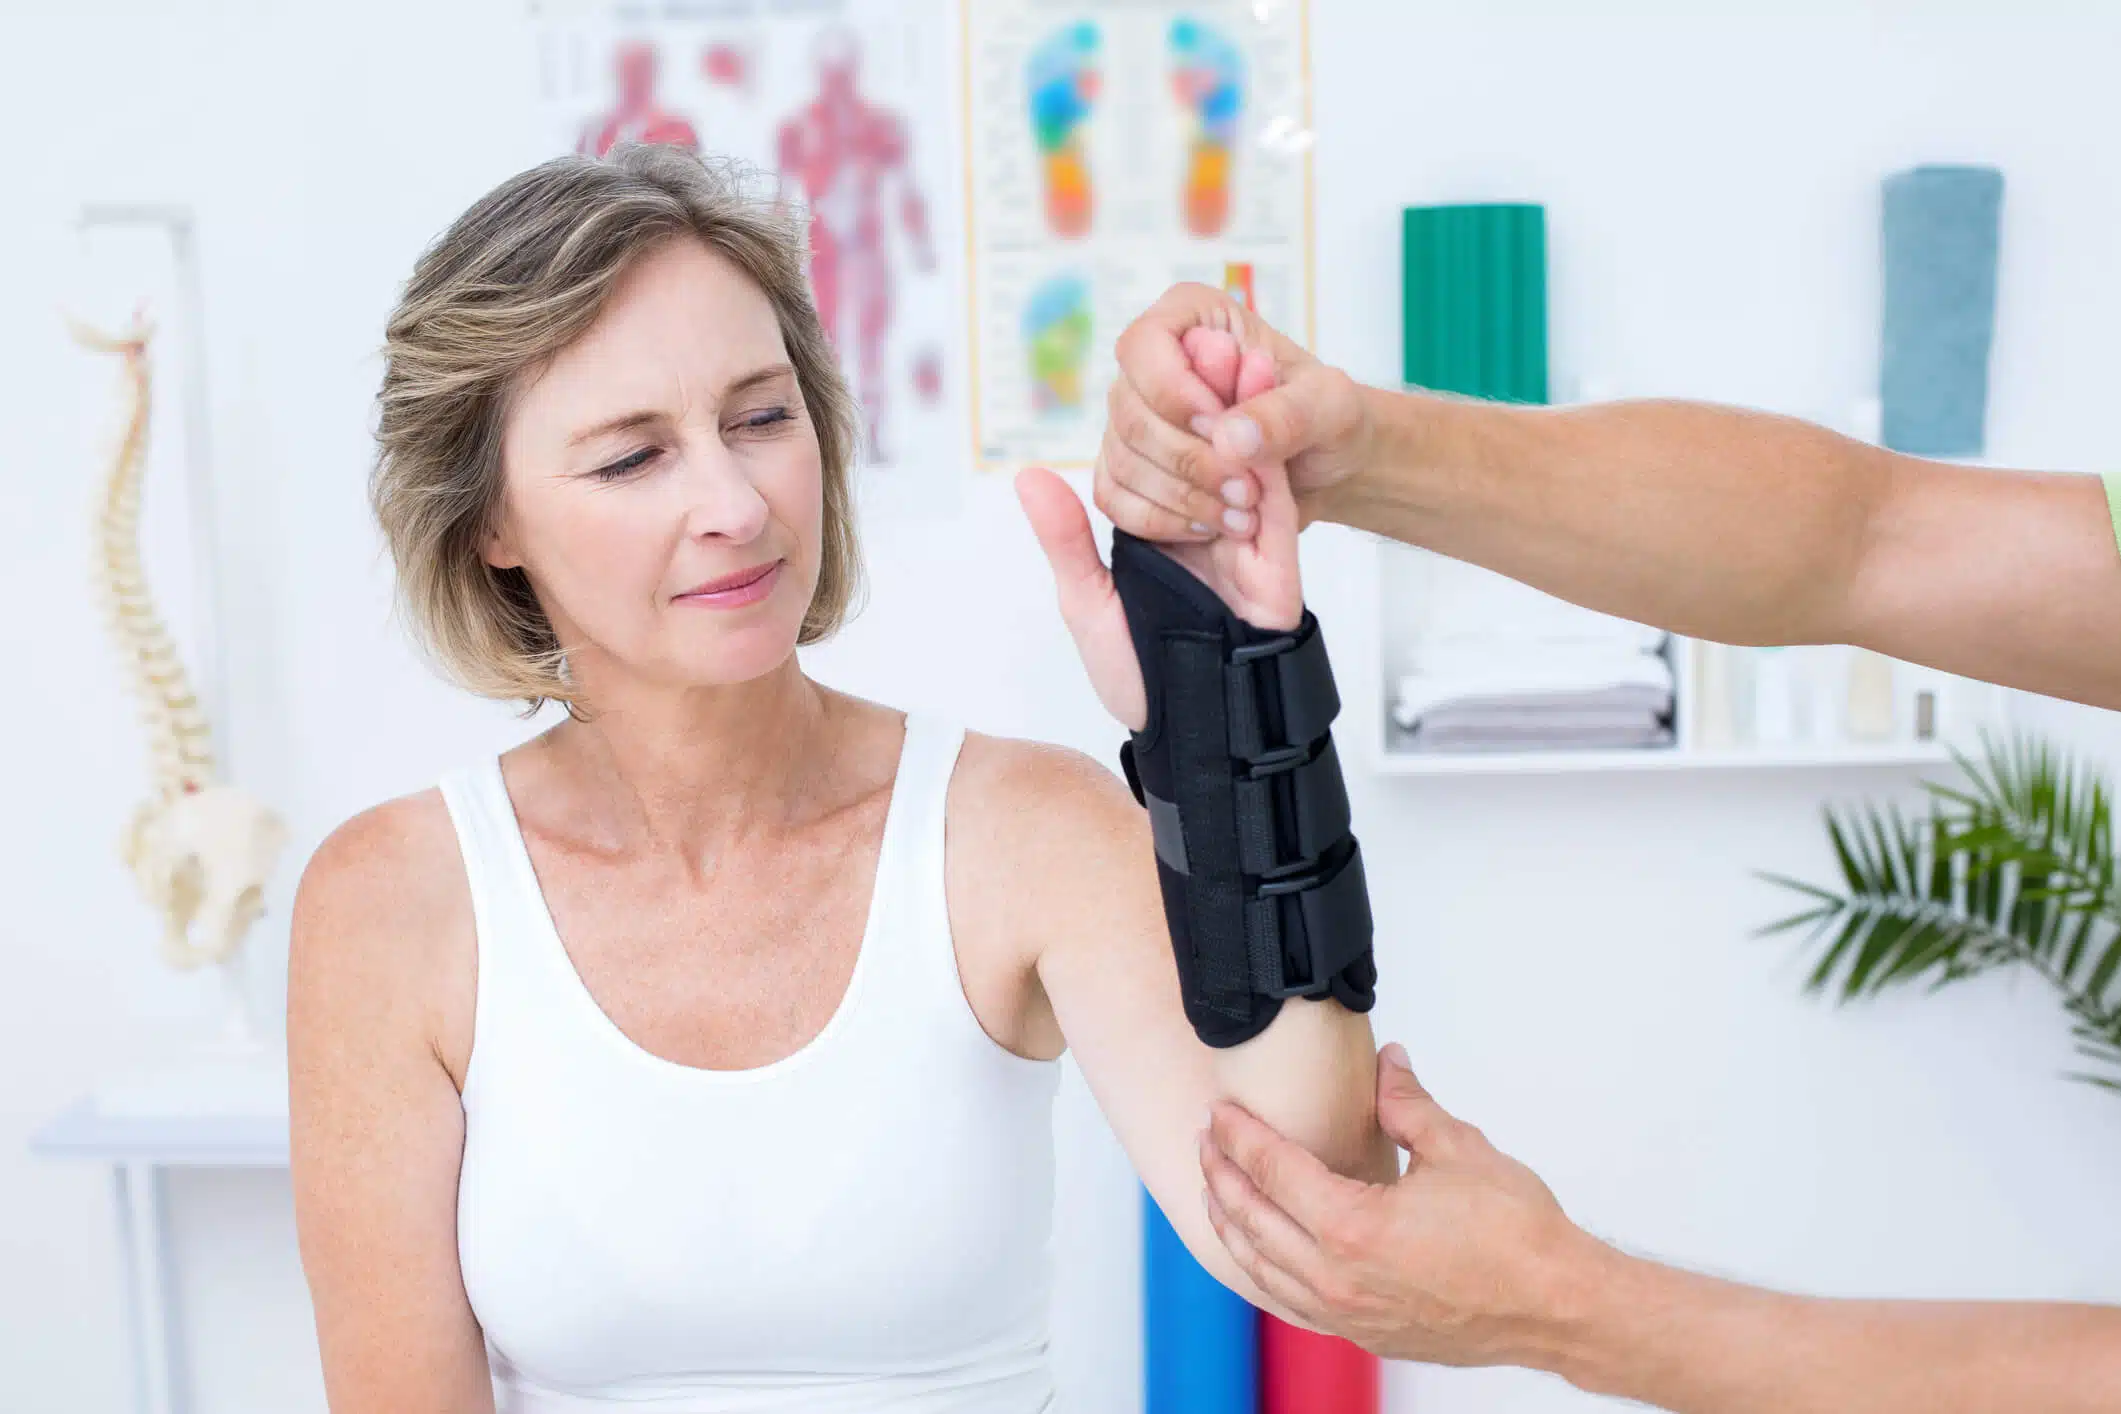 https://dunbarmedical.com/wp-content/uploads/2021/01/Woman-being-fitted-with-a-wrist-brace.jpg.webp